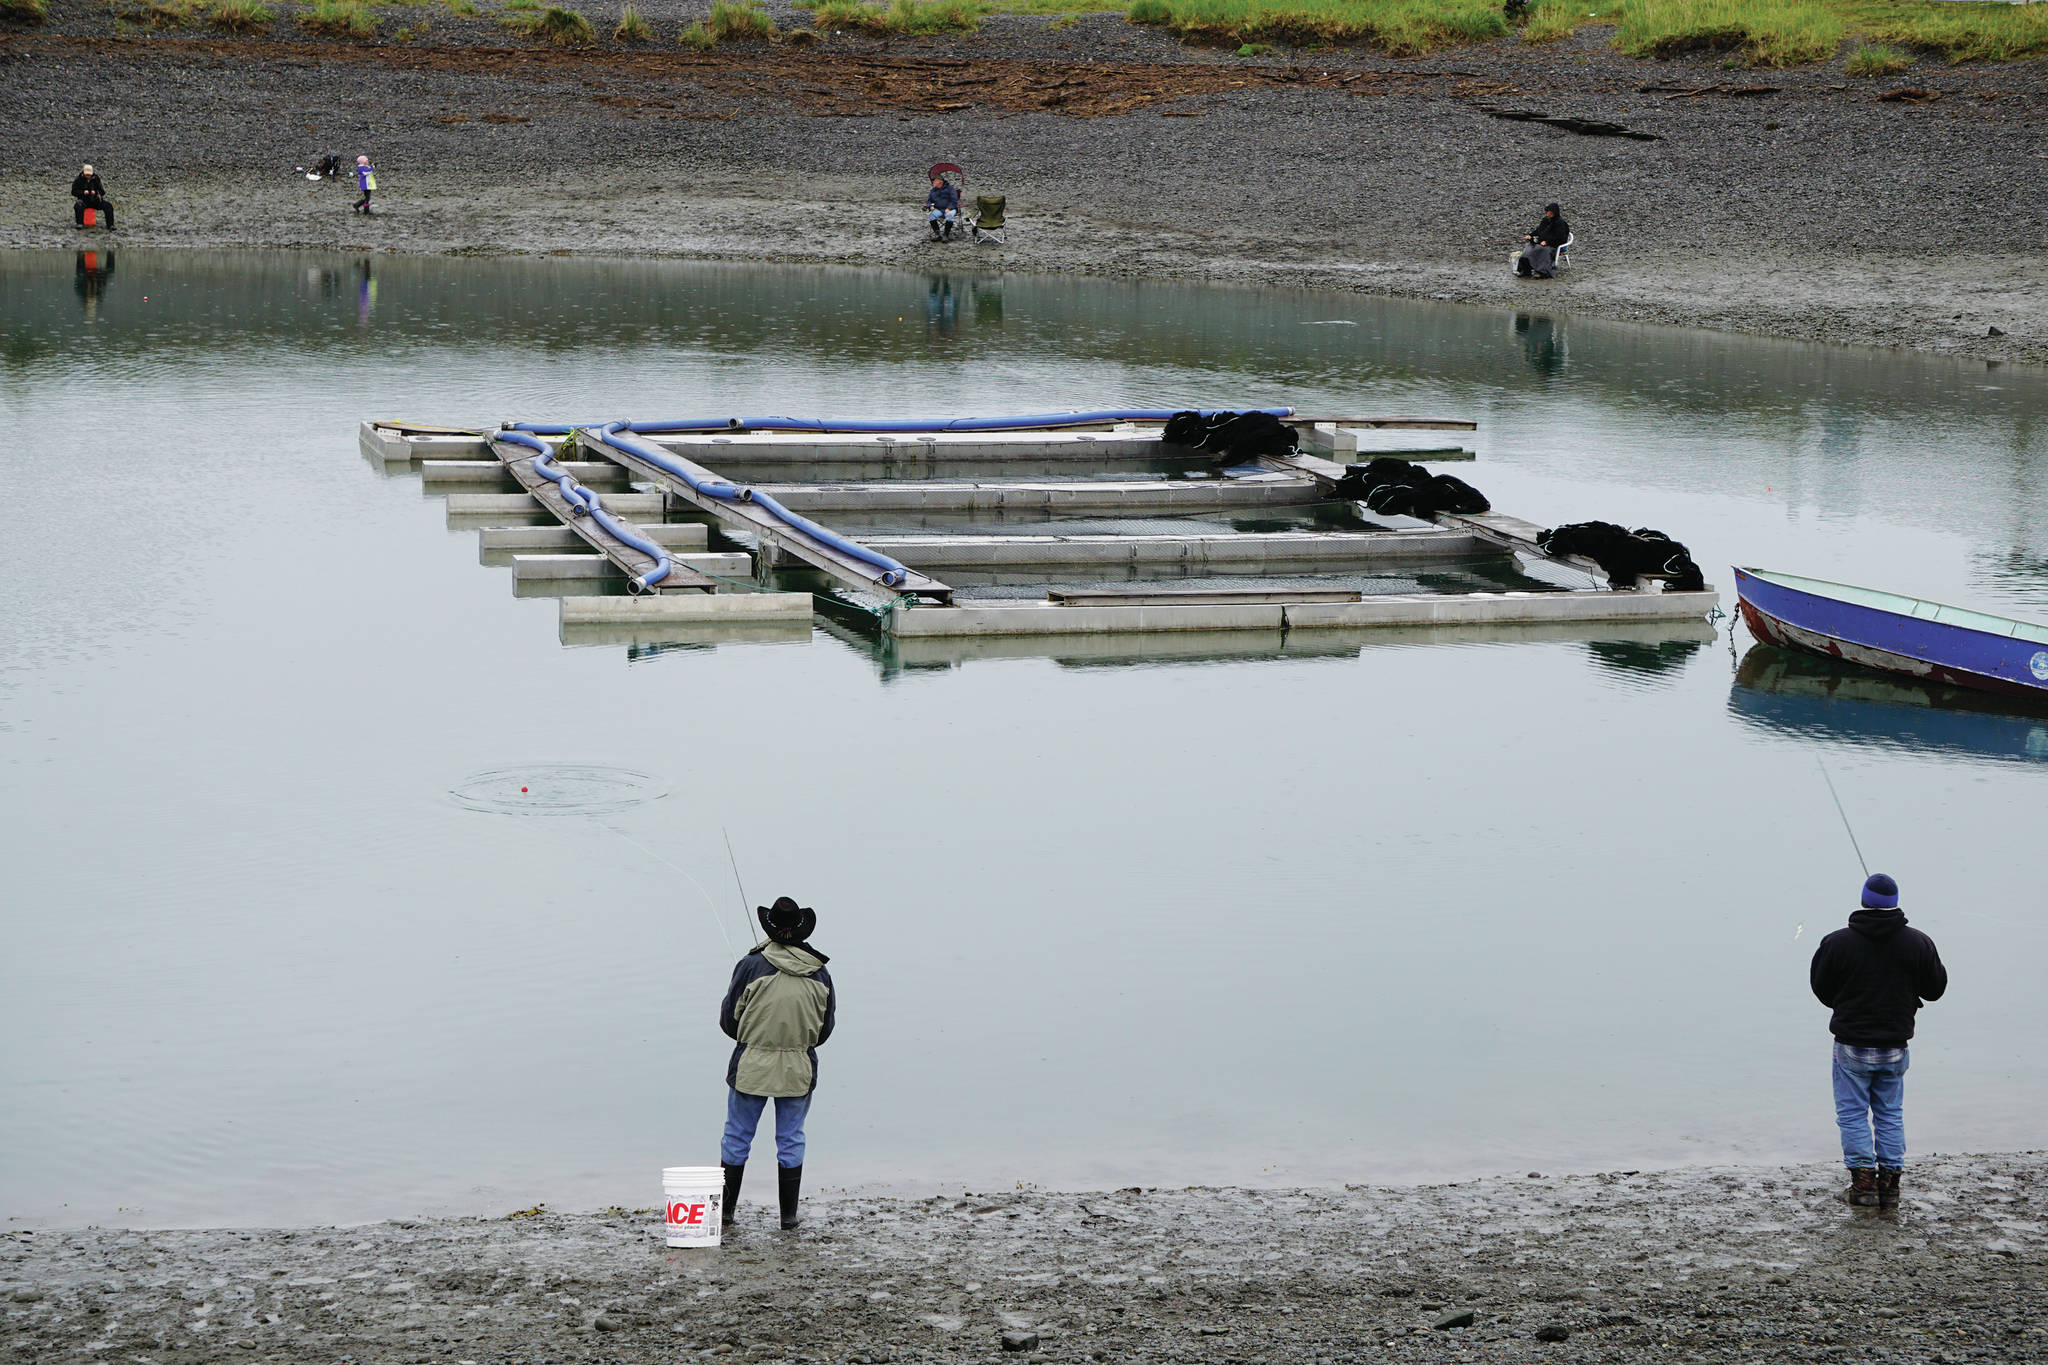 Anglers try their luck at the Nick Dudiak Fishing Lagoon on Saturday, May 29, 2021, on the Homer Spit in Homer, Alaska. The floating pen is for hatchery fish to imprint on the lagoon before being released into Kachemak Bay. (Photo by Michael Armstrong/Homer News)